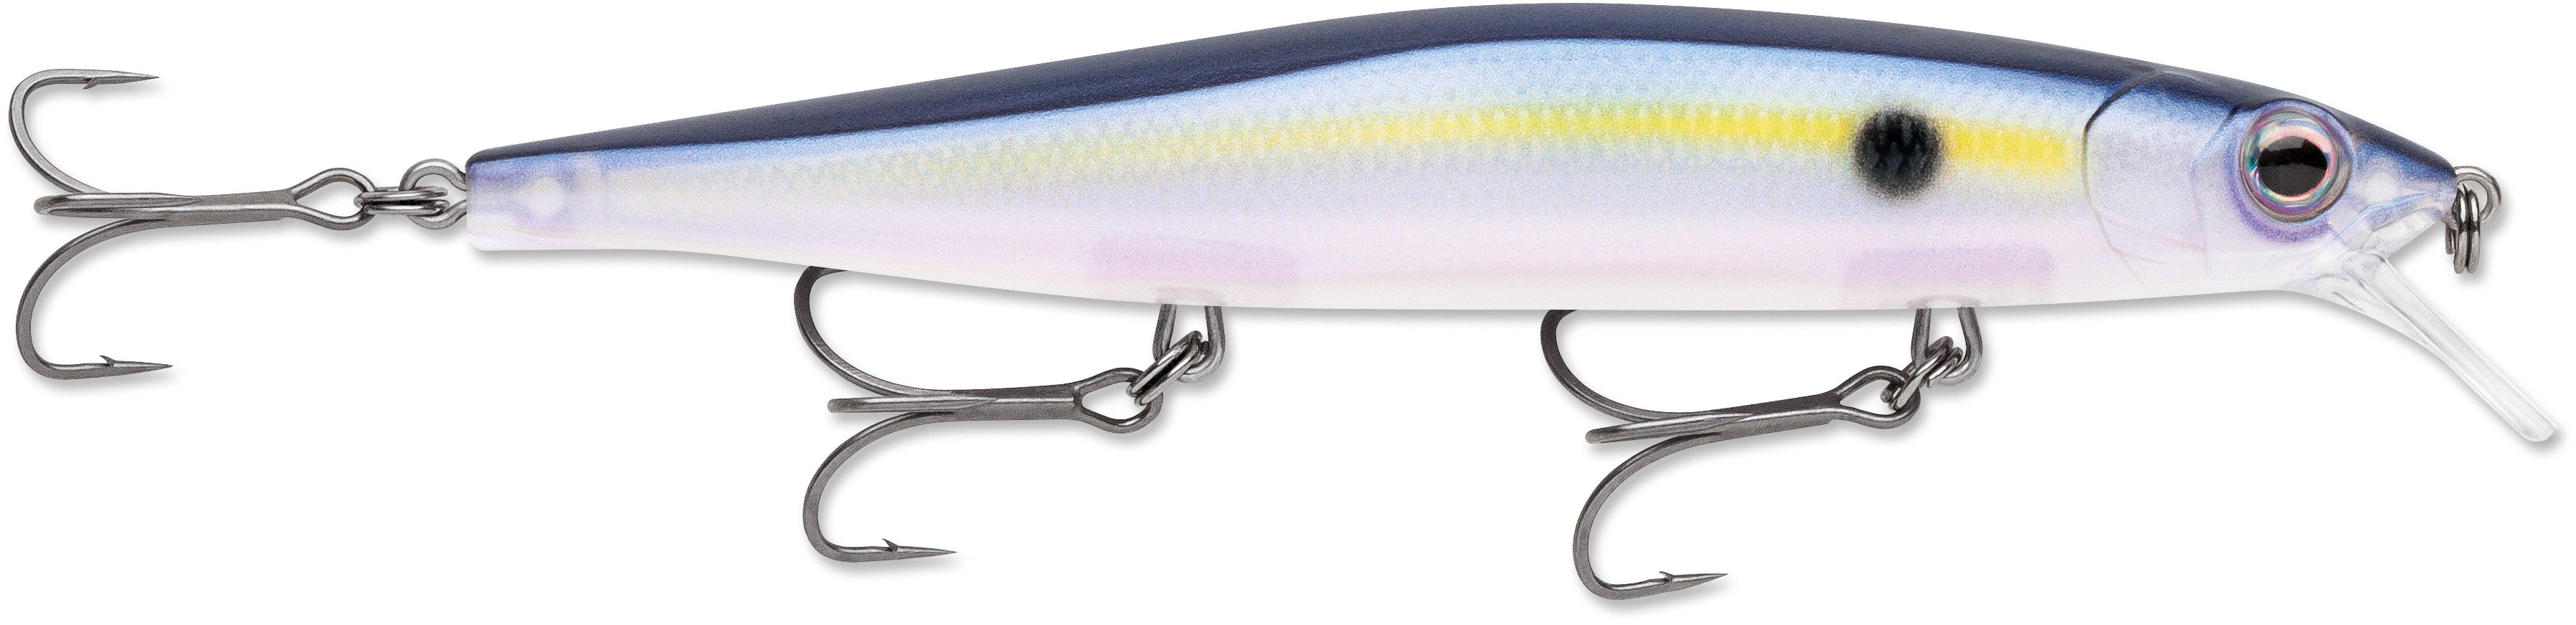 Mid-Depth Lures and Rigs - Stickbaits or Jerkbaits